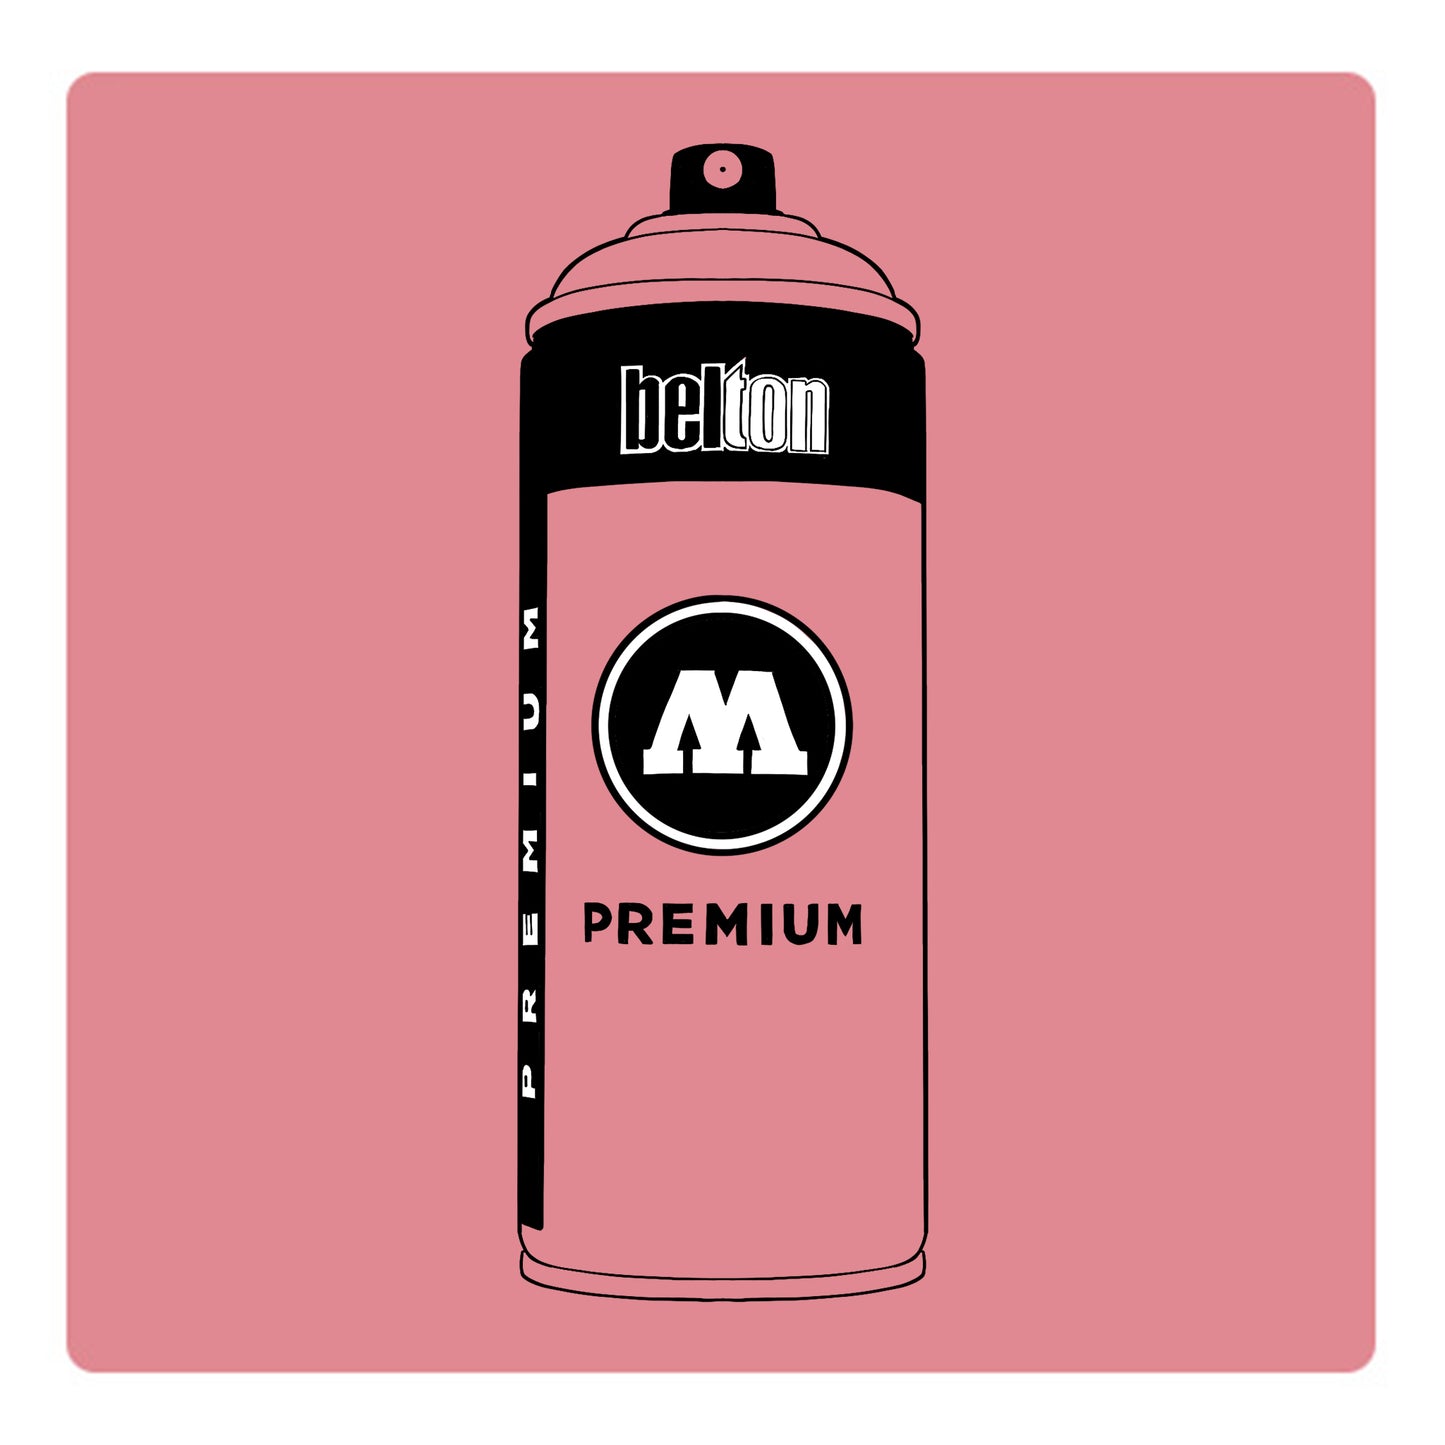 A black outline drawing of a pastel pink spray paint can with the words "belton","premium" and the letter"M" written on the face in black and white font. The background is a color swatch of the same pastel pink with a white border.